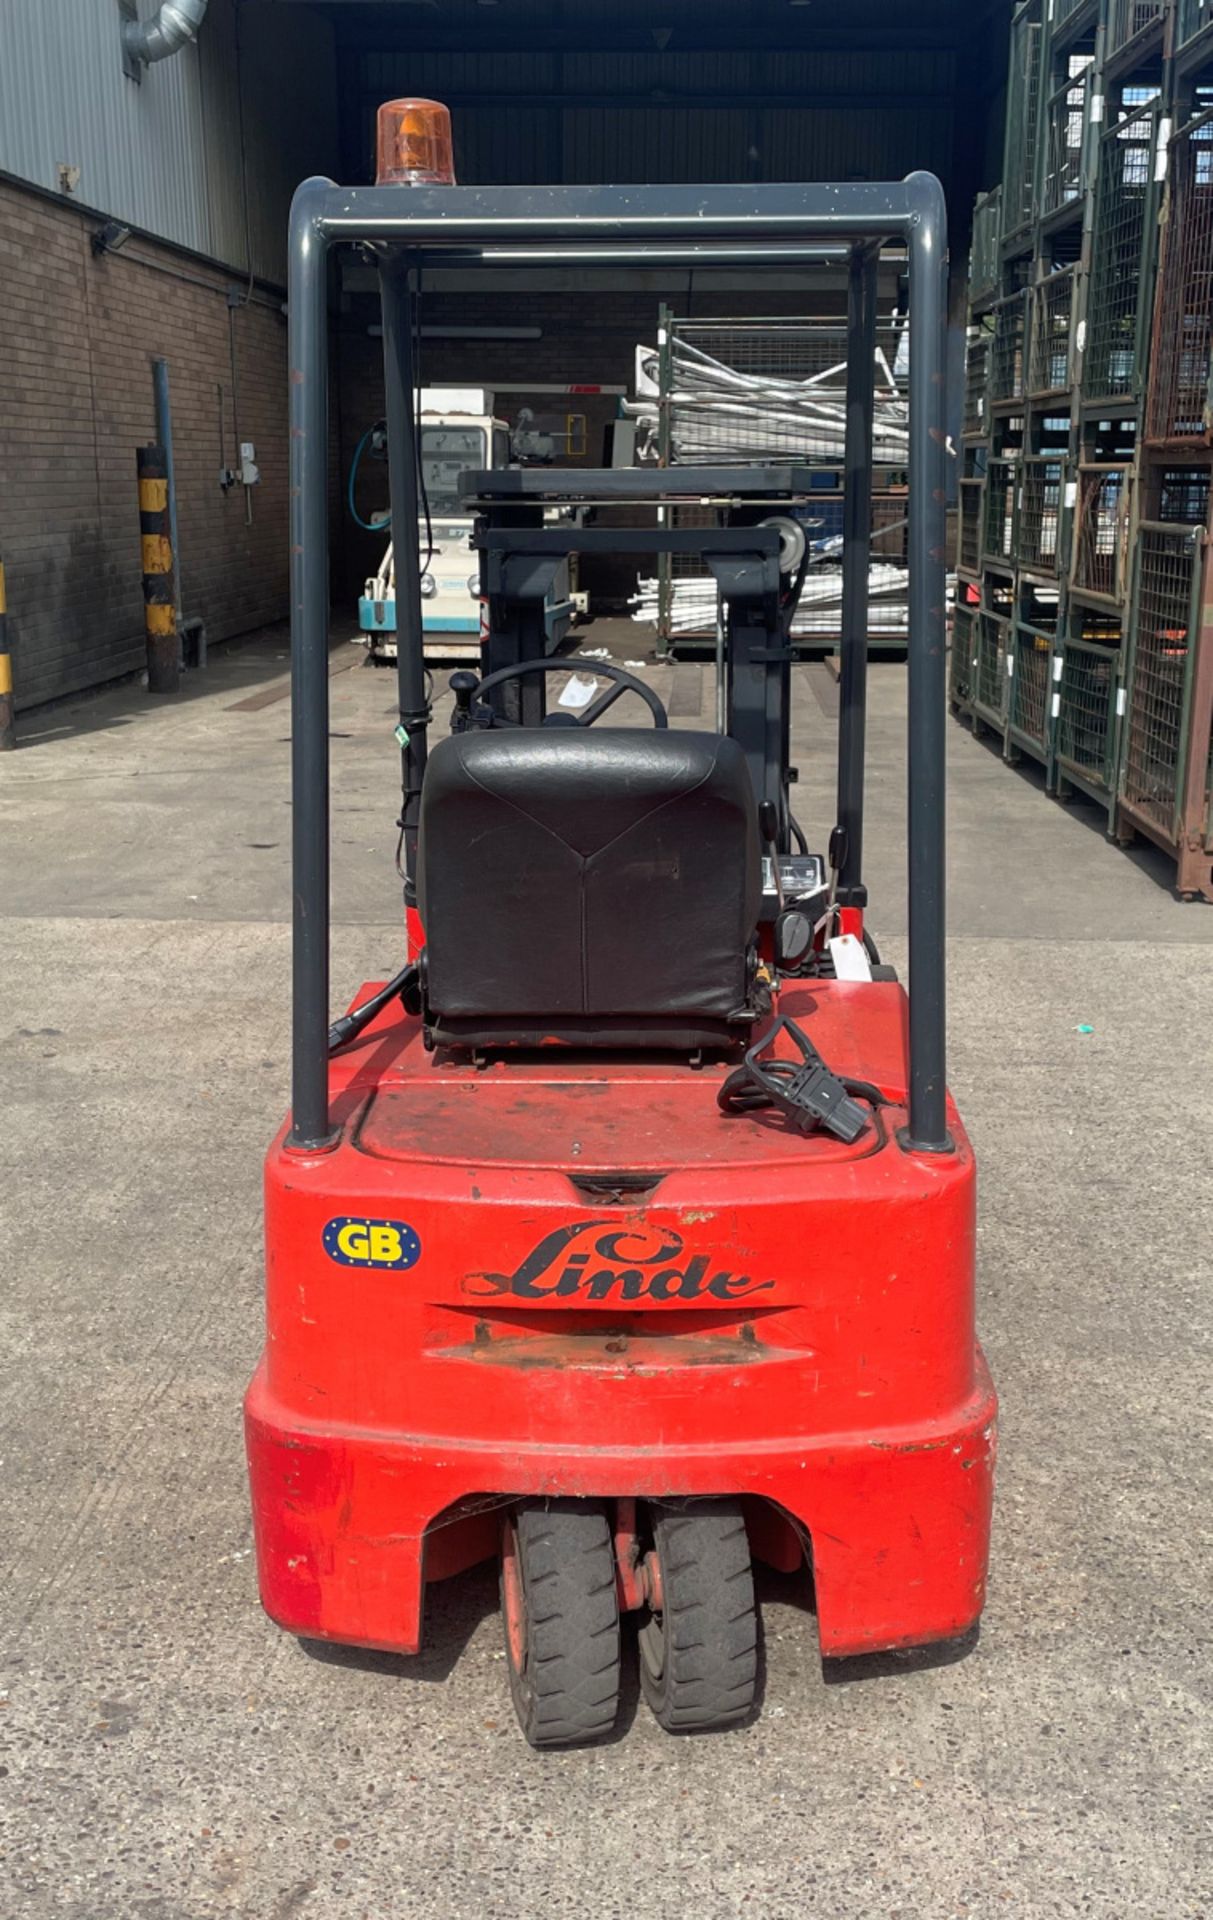 Linde AG E15 electric forklift - 1.5T - deadweight 2880 kg - 1954 hours used - no charger - Image 2 of 16